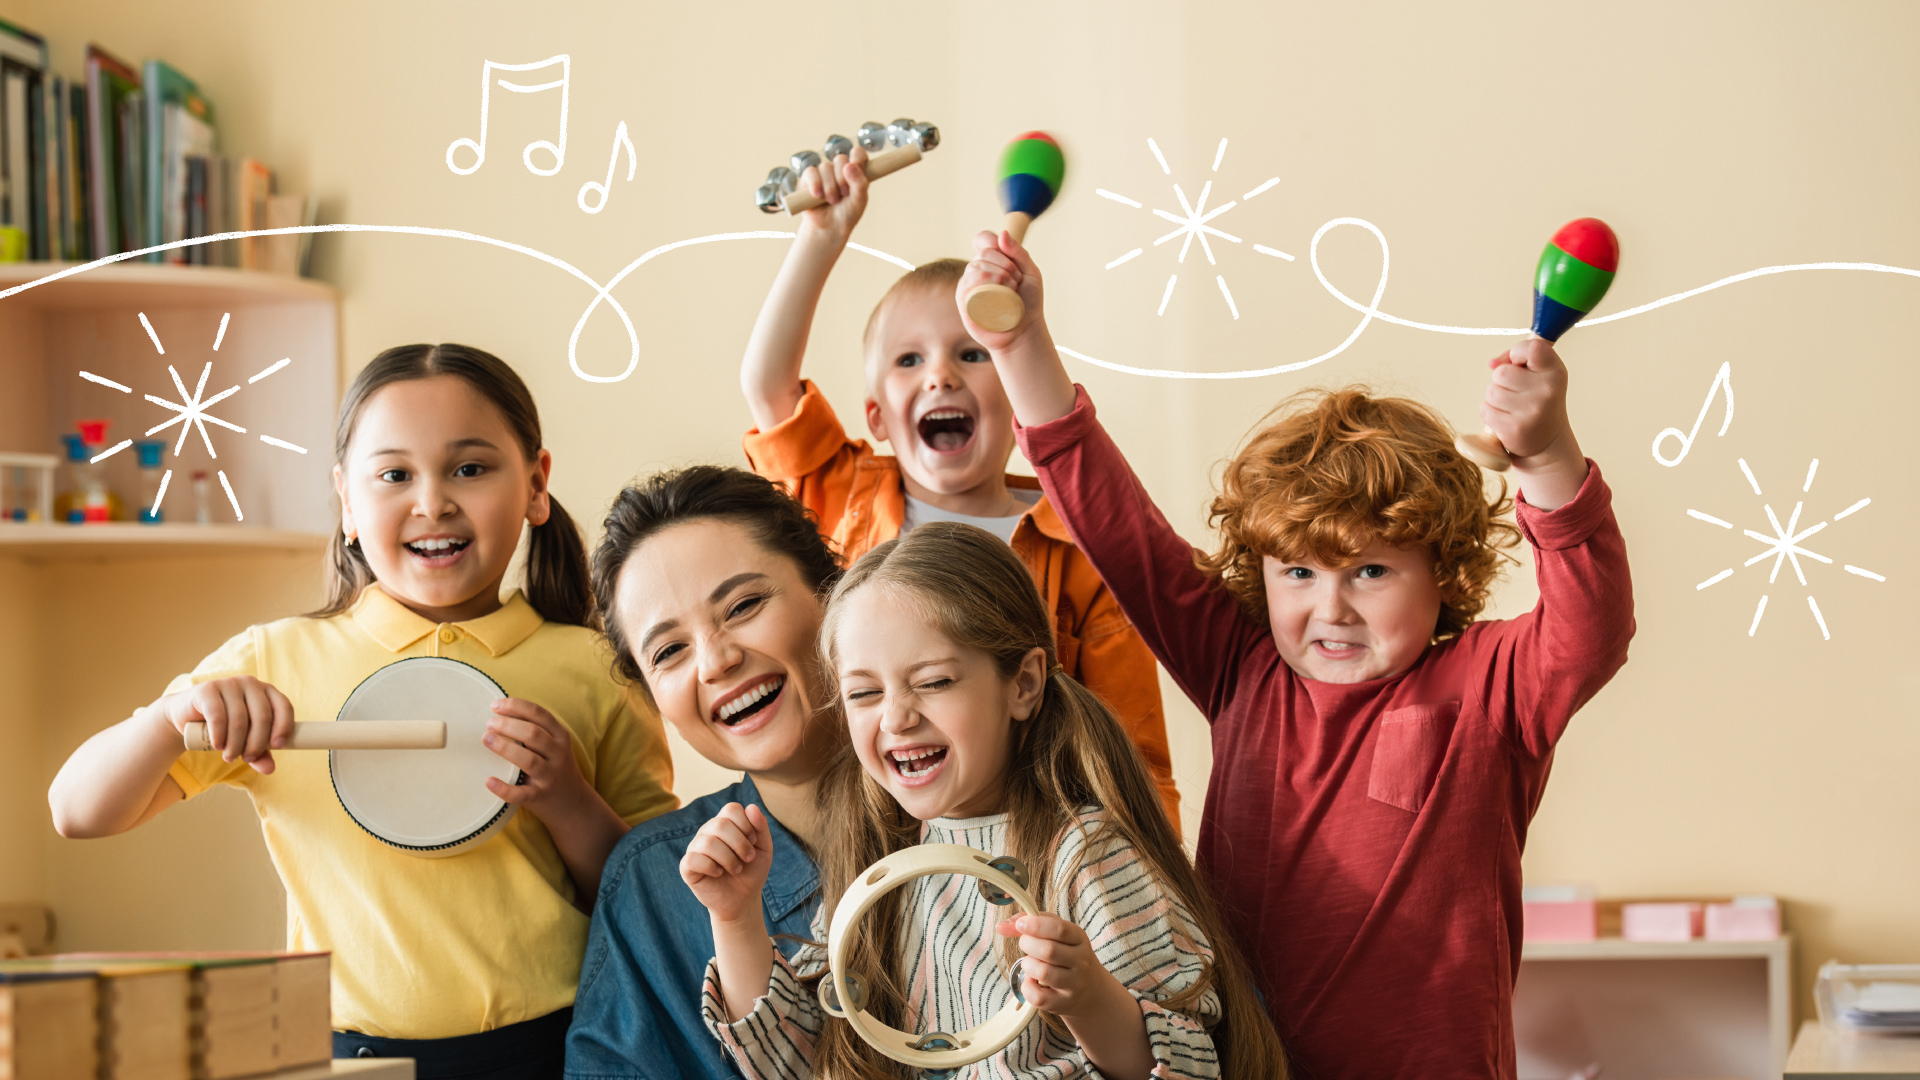 Calming Music for End-of-School Celebrations